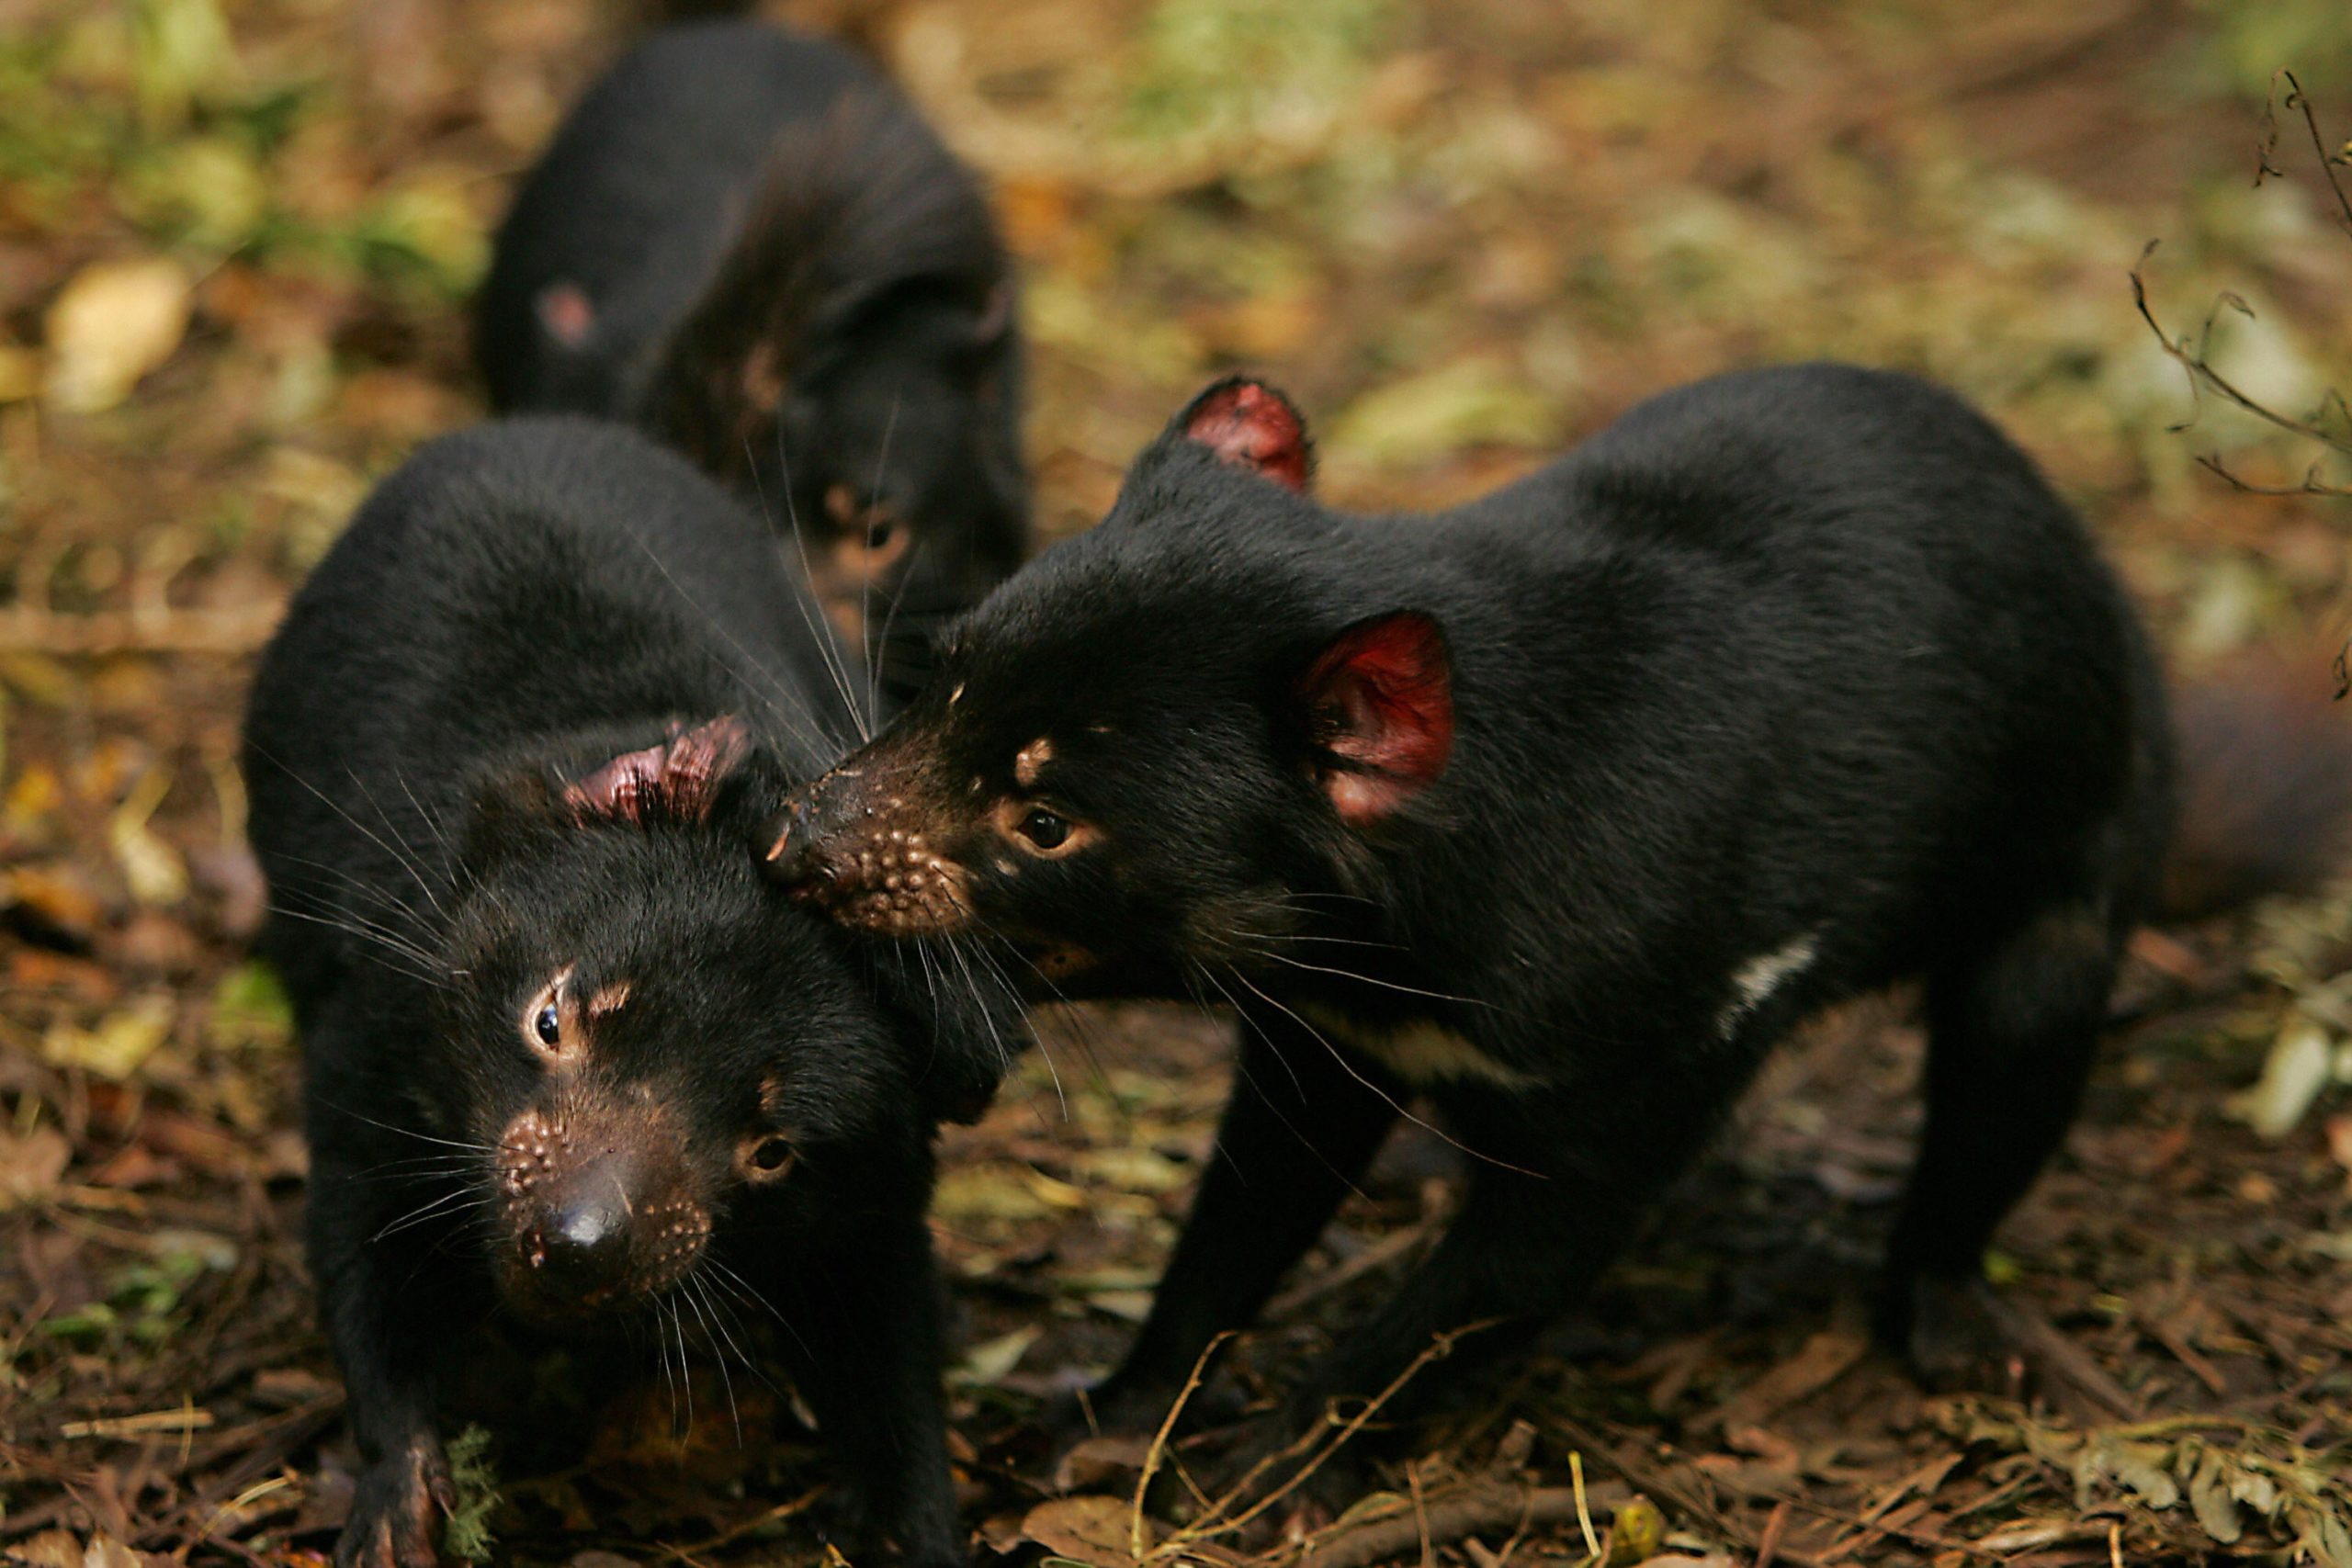 Devils spread their facial disease through biting one another in social and mating scenarios. (Photo: ANOEK DE GROOT/AFP, Getty Images)